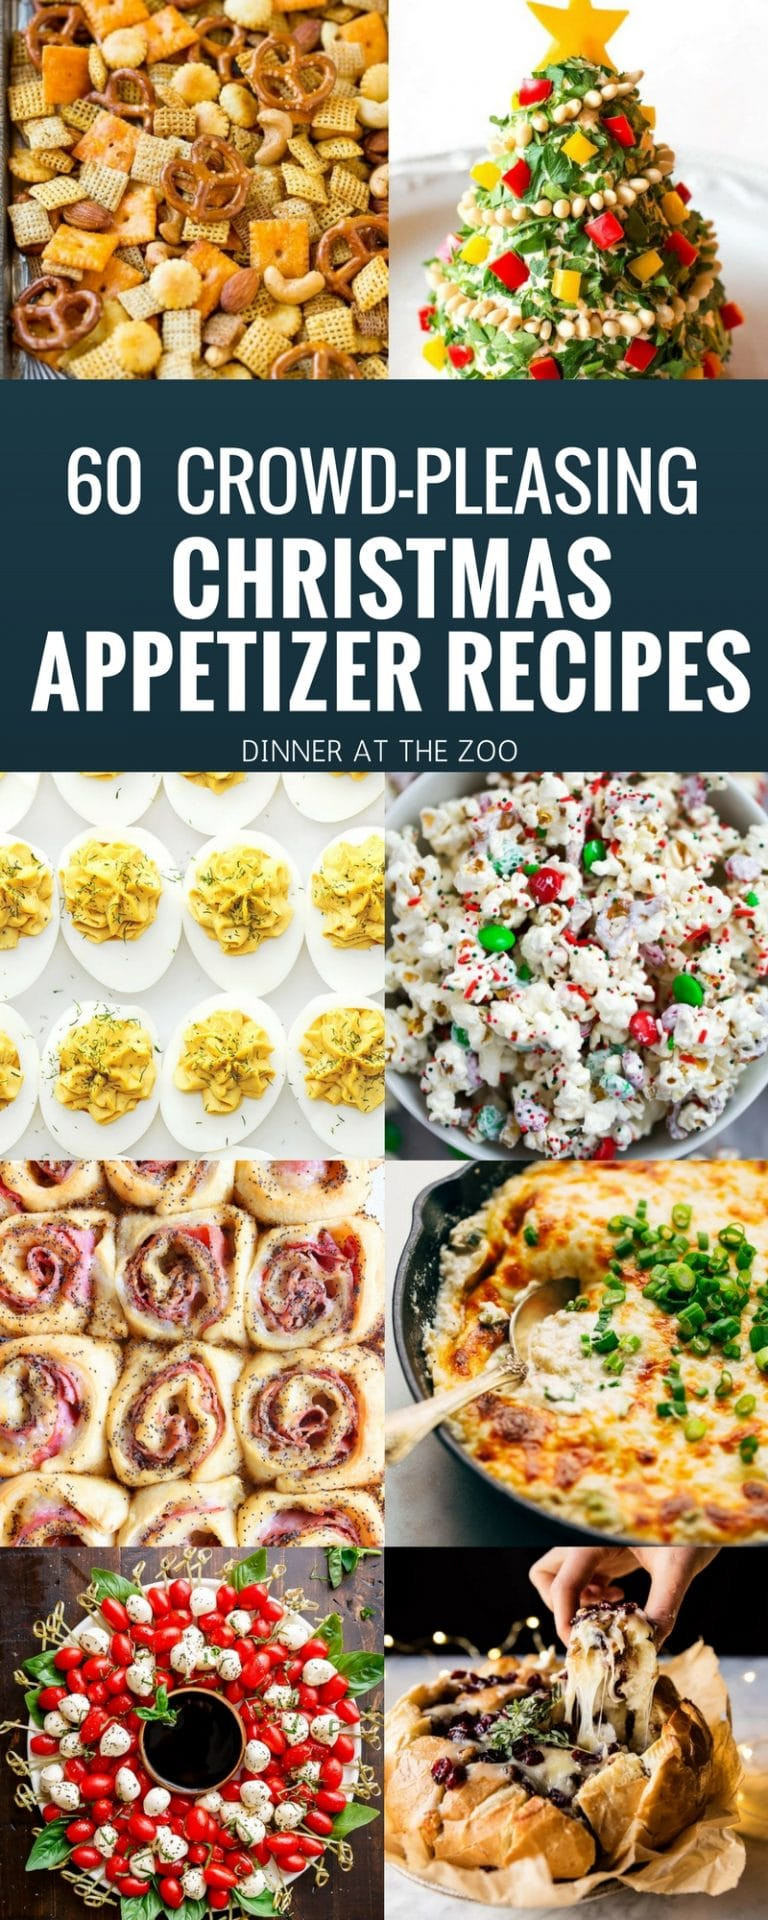 Christmas Appetizers 2017
 60 Christmas Appetizer Recipes Dinner at the Zoo